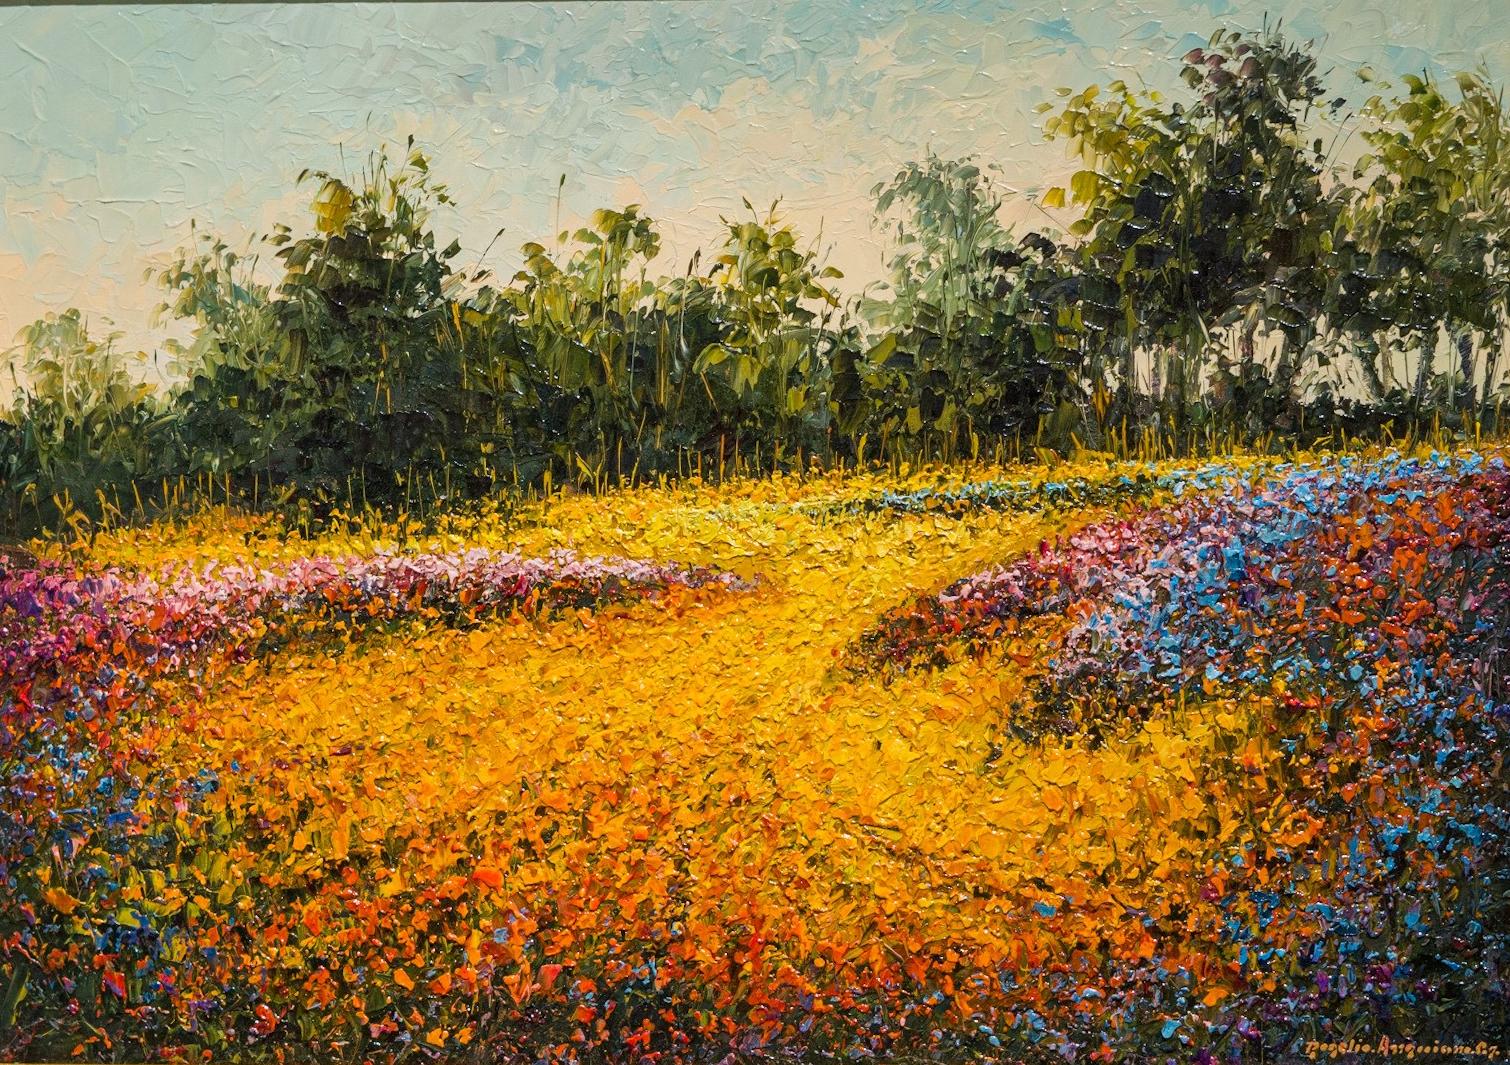  Field of Flowers  Oil on Panel   Palette Knife  Mexican Artist  14 x 19 framed  - Painting by Rogelio Anguiano Cabrera